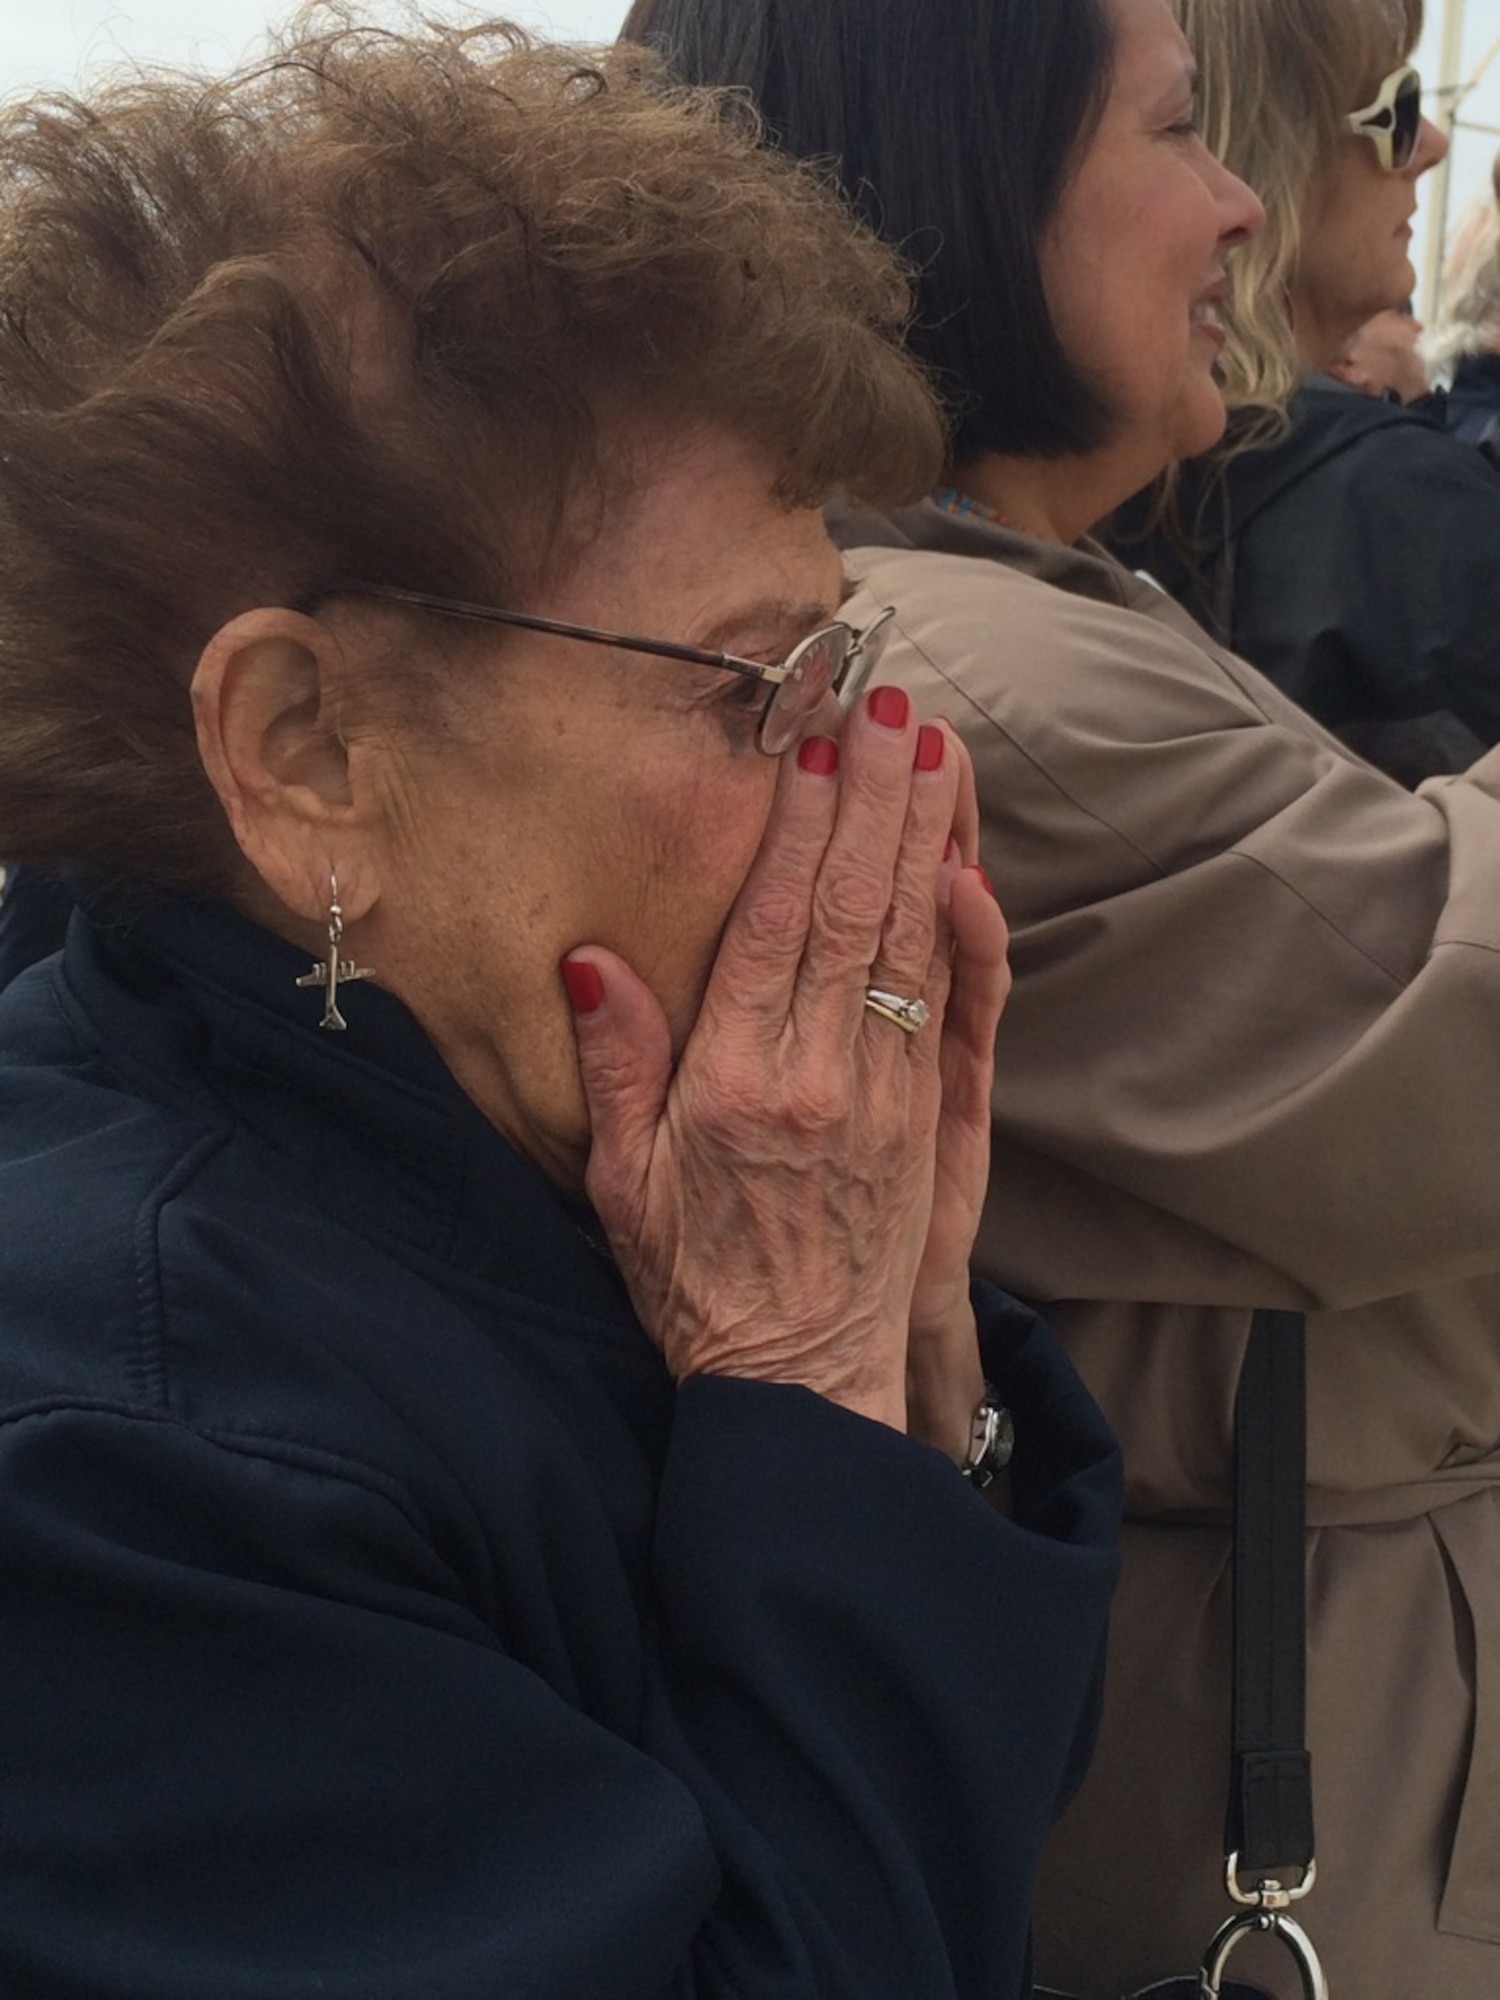 Connie Palacioz, who worked at the Wichita Boeing B-29 Superfortress plant from 1943 until 1945, becomes emotional at a Wichita, Kansas B-29 rollout ceremony March 23, 2015. Palacioz worked to help restore the aircraft for the last 15 years and installed the original rivets for the pilot section in the 1940s. She began to cry thinking of all the other "Rosie the Riveters" she worked with who could not be there that day, the 90-year-old said. (U.S. Air Force Photo by 1st Lt. Jessica Brown)